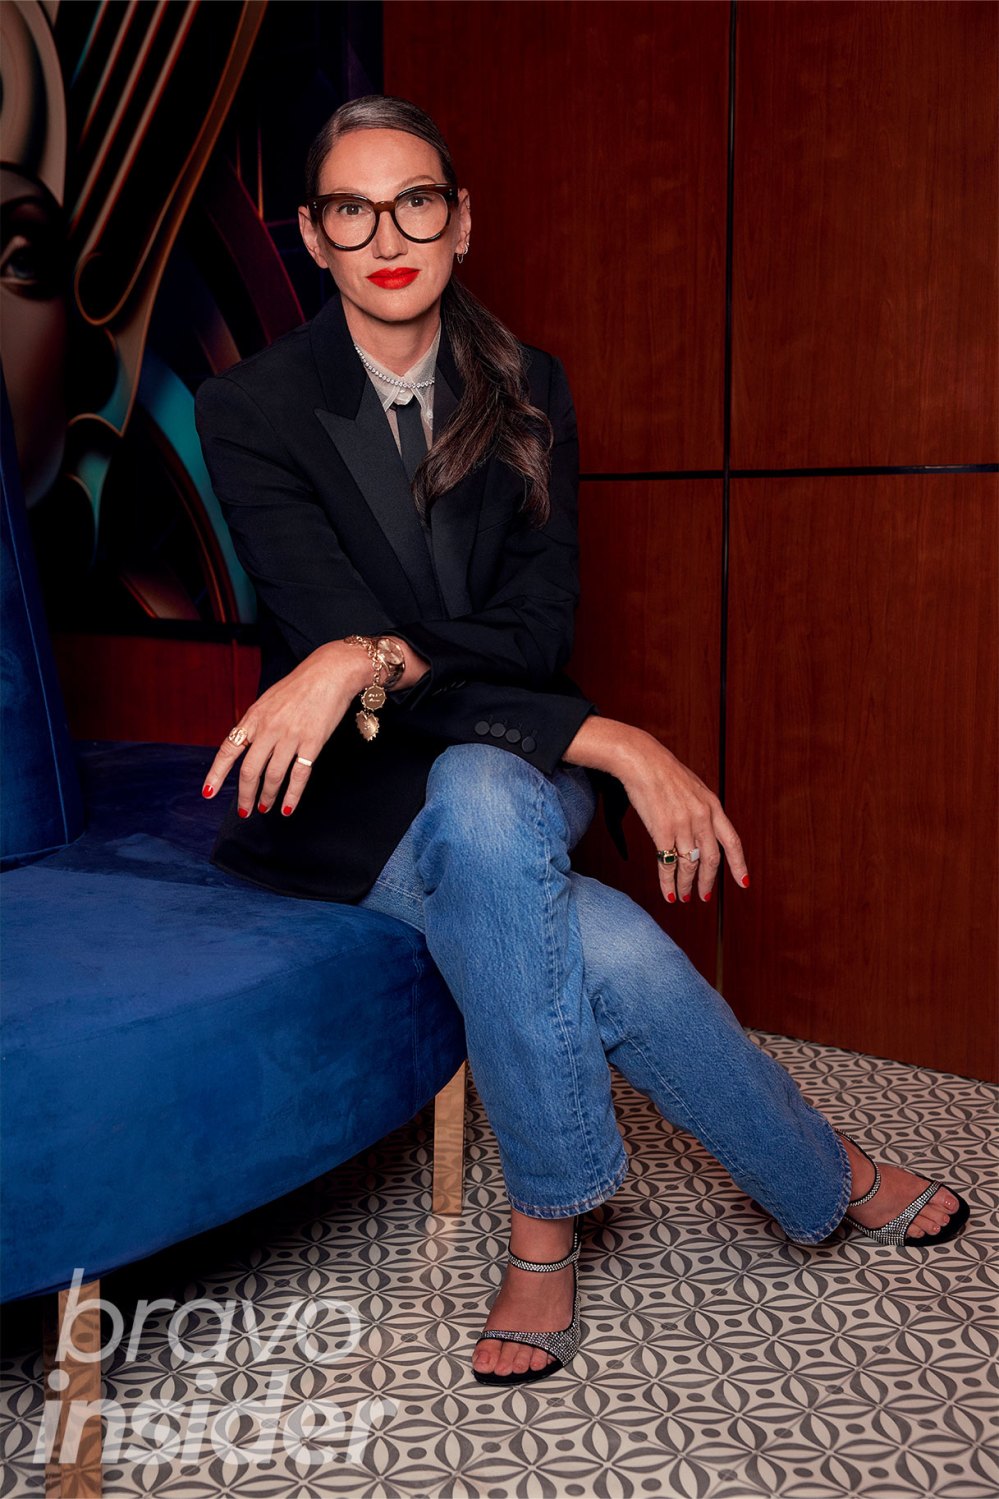 Jenna Lyons Dresses Down for ‘Real Housewives of New York’ Reunion